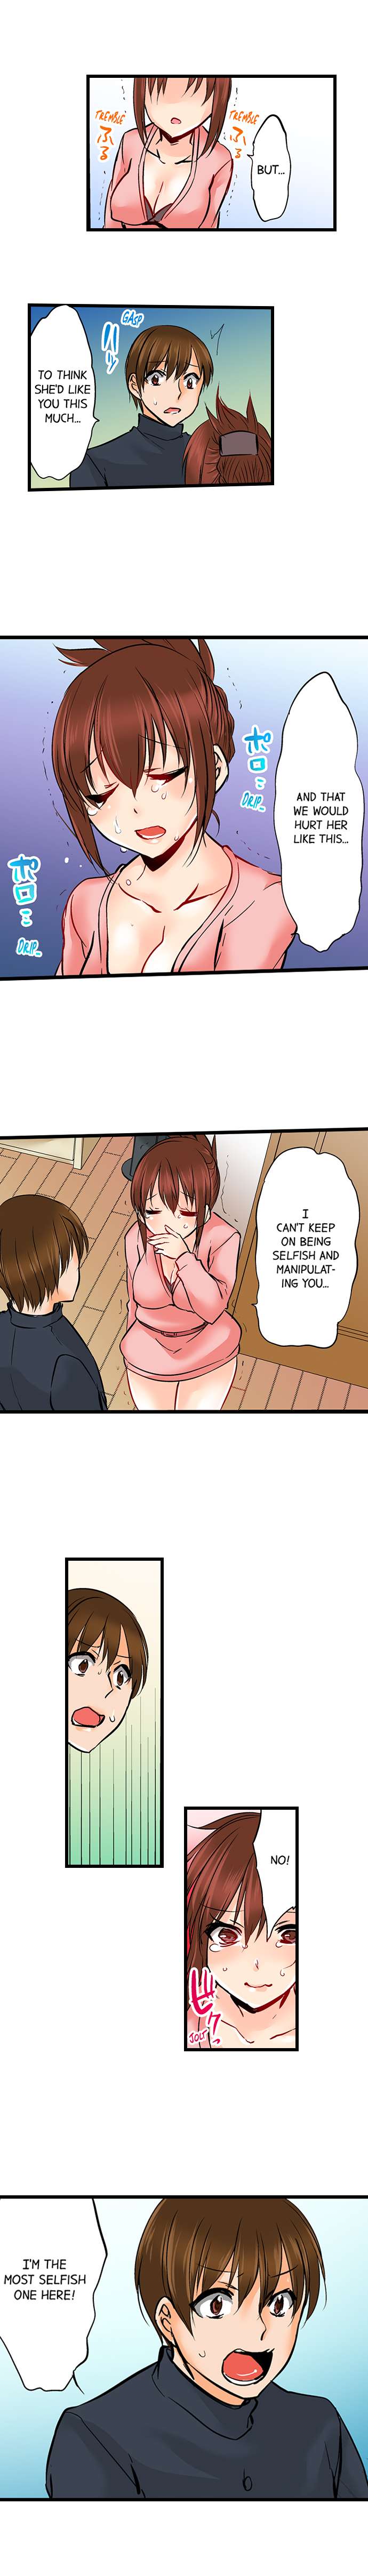 Touching My Older Sister Under the Table - Chapter 36 Page 3